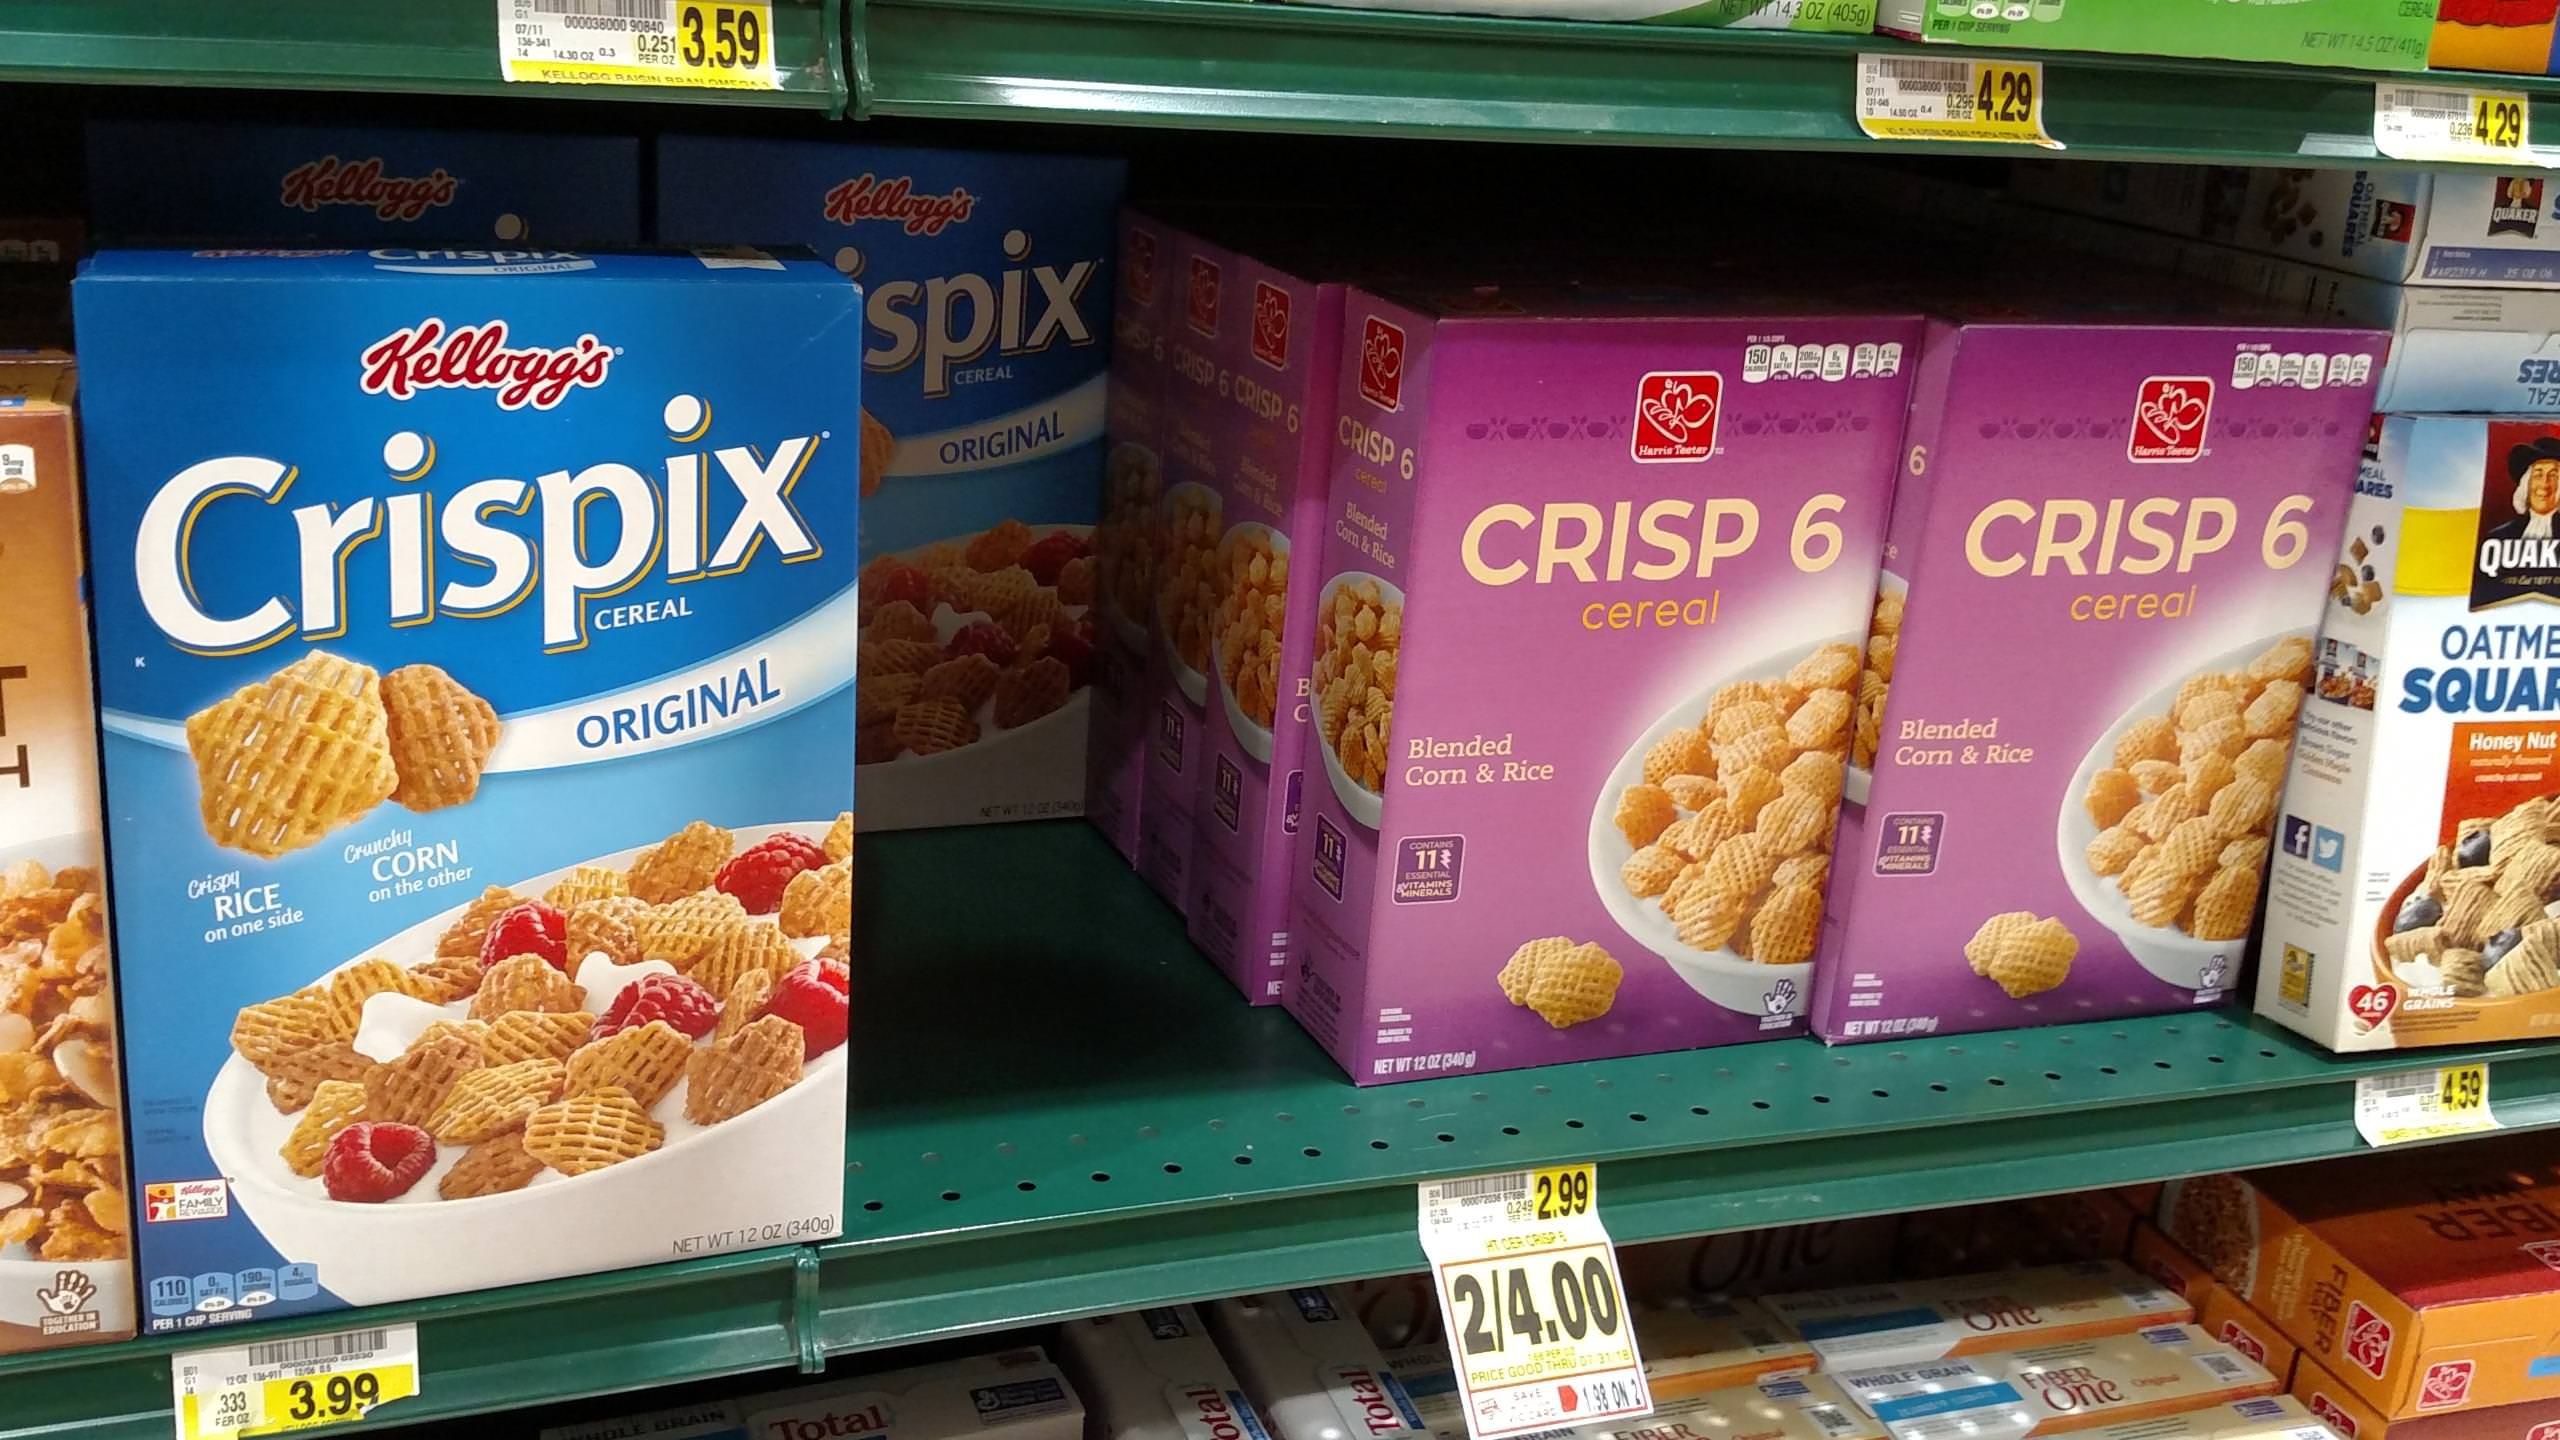 The *** who named this store brand version of Crispix deserves a beer and a promotion.